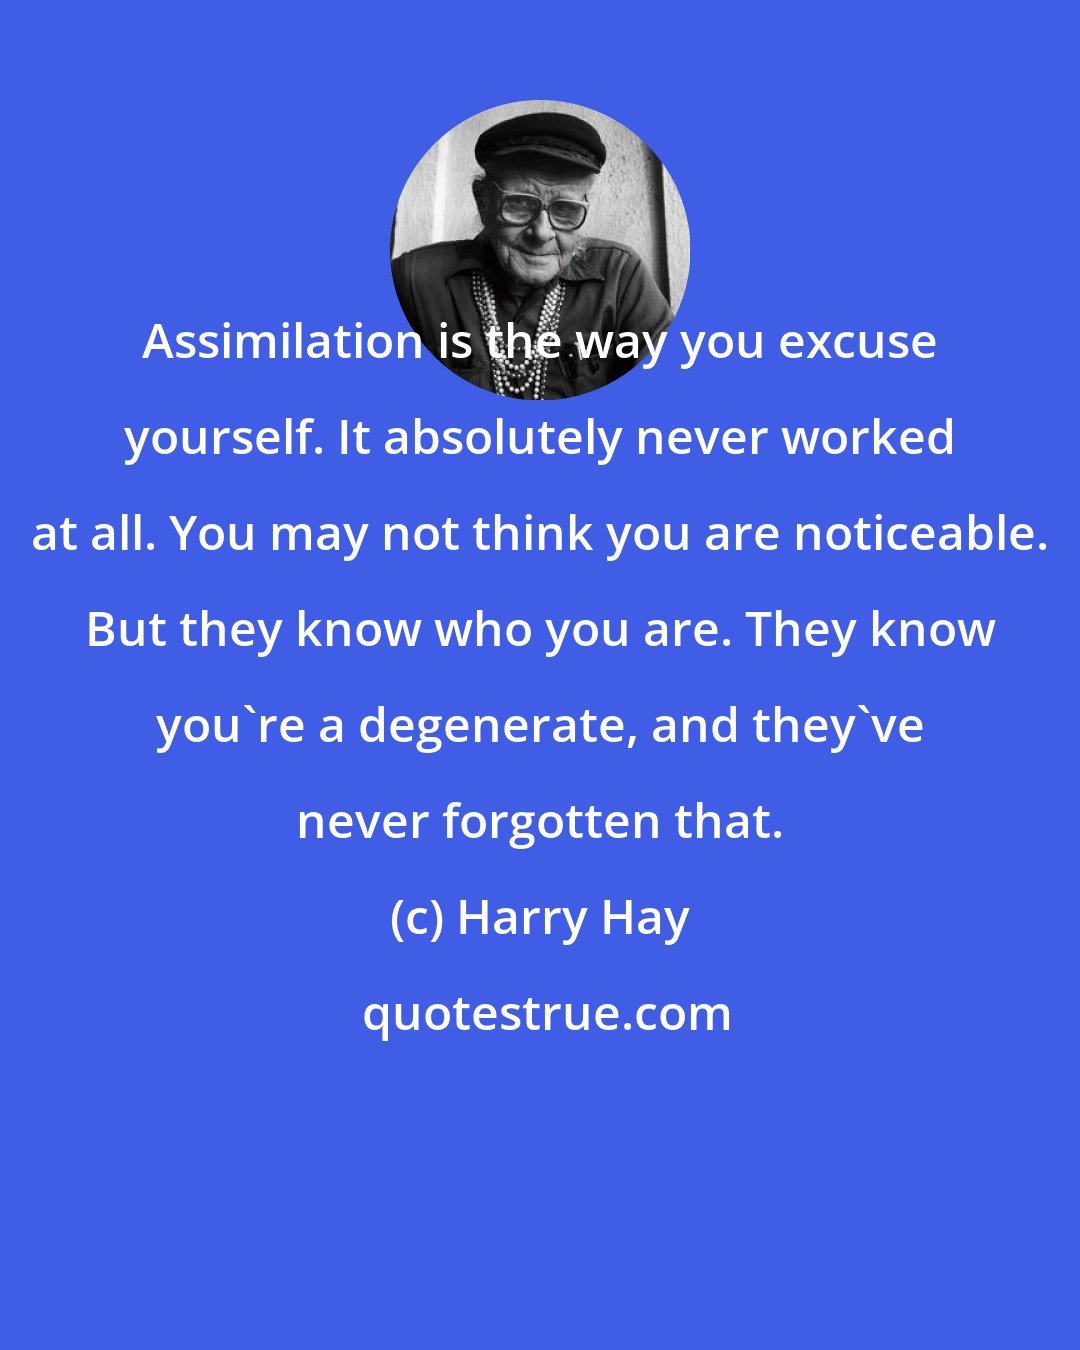 Harry Hay: Assimilation is the way you excuse yourself. It absolutely never worked at all. You may not think you are noticeable. But they know who you are. They know you're a degenerate, and they've never forgotten that.